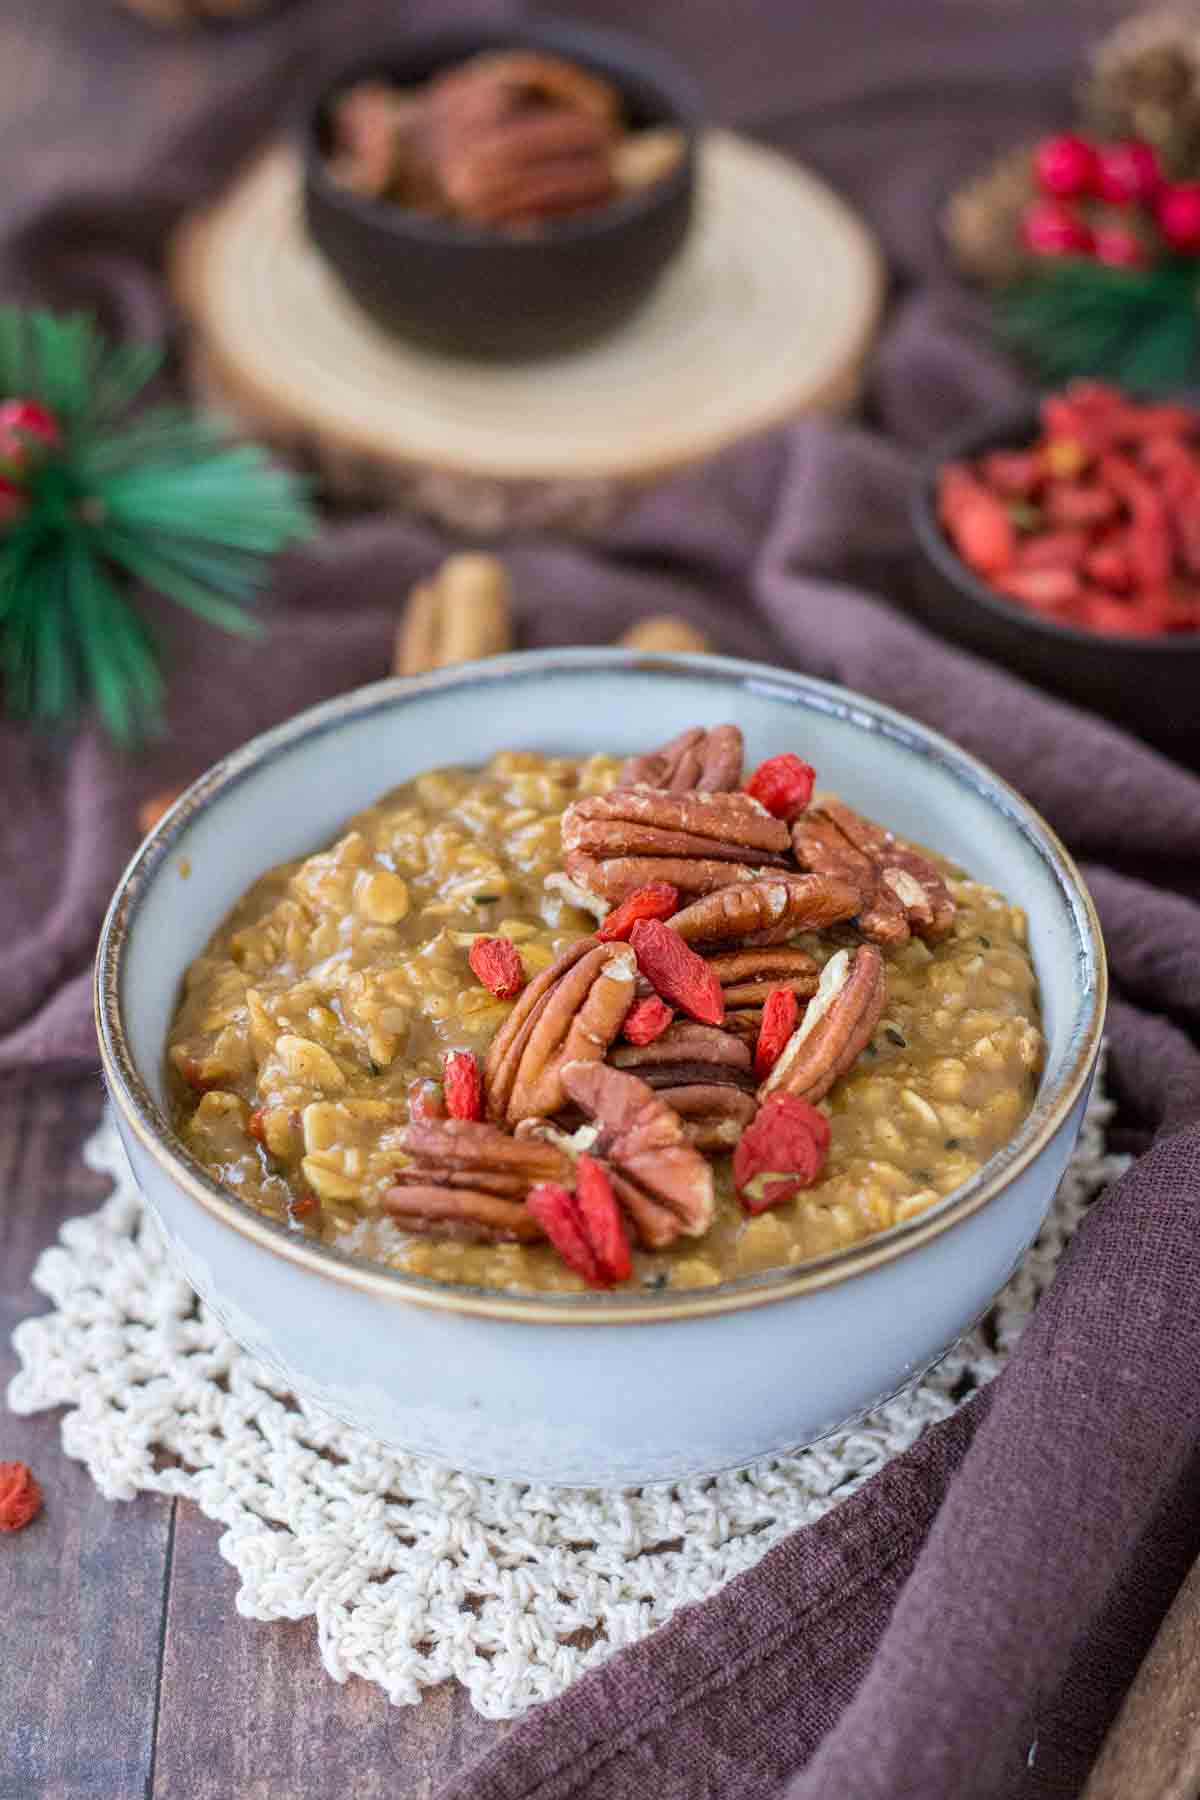 Gingerbread Oatmeal with goji berries topped with pecans